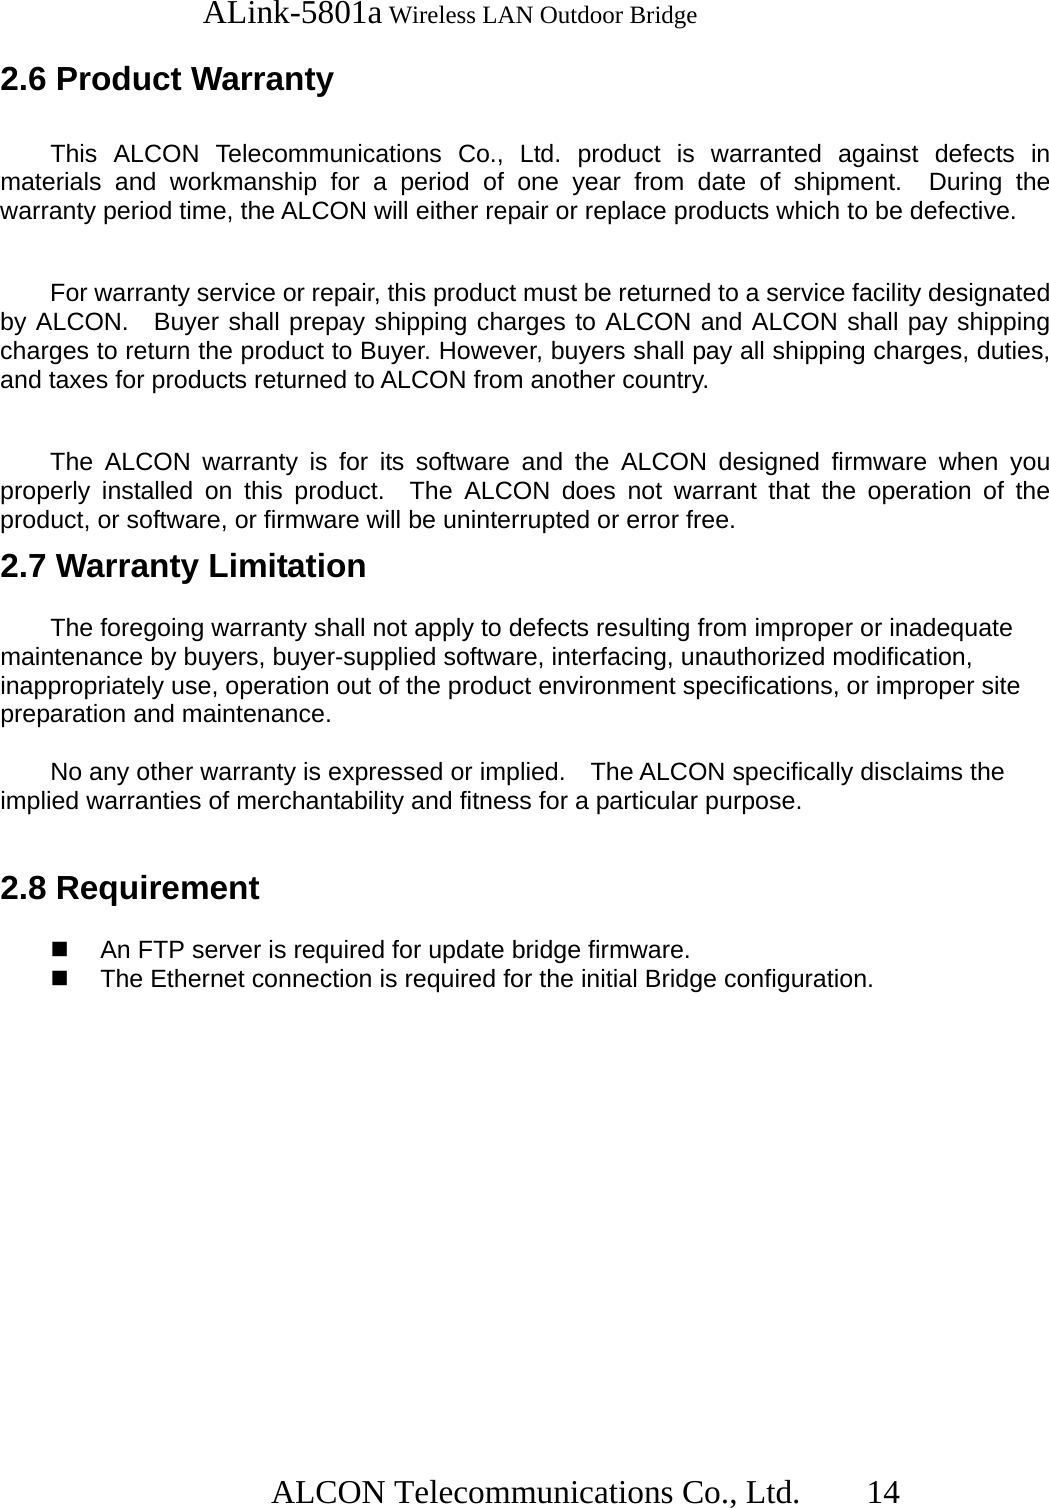   ALink-5801a Wireless LAN Outdoor Bridge                  ALCON Telecommunications Co., Ltd.   14  2.6 Product Warranty    This ALCON Telecommunications Co., Ltd. product is warranted against defects in materials and workmanship for a period of one year from date of shipment.  During the warranty period time, the ALCON will either repair or replace products which to be defective.  For warranty service or repair, this product must be returned to a service facility designated by ALCON.  Buyer shall prepay shipping charges to ALCON and ALCON shall pay shipping charges to return the product to Buyer. However, buyers shall pay all shipping charges, duties, and taxes for products returned to ALCON from another country.  The ALCON warranty is for its software and the ALCON designed firmware when you properly installed on this product.  The ALCON does not warrant that the operation of the product, or software, or firmware will be uninterrupted or error free. 2.7 Warranty Limitation  The foregoing warranty shall not apply to defects resulting from improper or inadequate maintenance by buyers, buyer-supplied software, interfacing, unauthorized modification, inappropriately use, operation out of the product environment specifications, or improper site preparation and maintenance.  No any other warranty is expressed or implied.    The ALCON specifically disclaims the implied warranties of merchantability and fitness for a particular purpose.  2.8 Requirement    An FTP server is required for update bridge firmware.   The Ethernet connection is required for the initial Bridge configuration. 